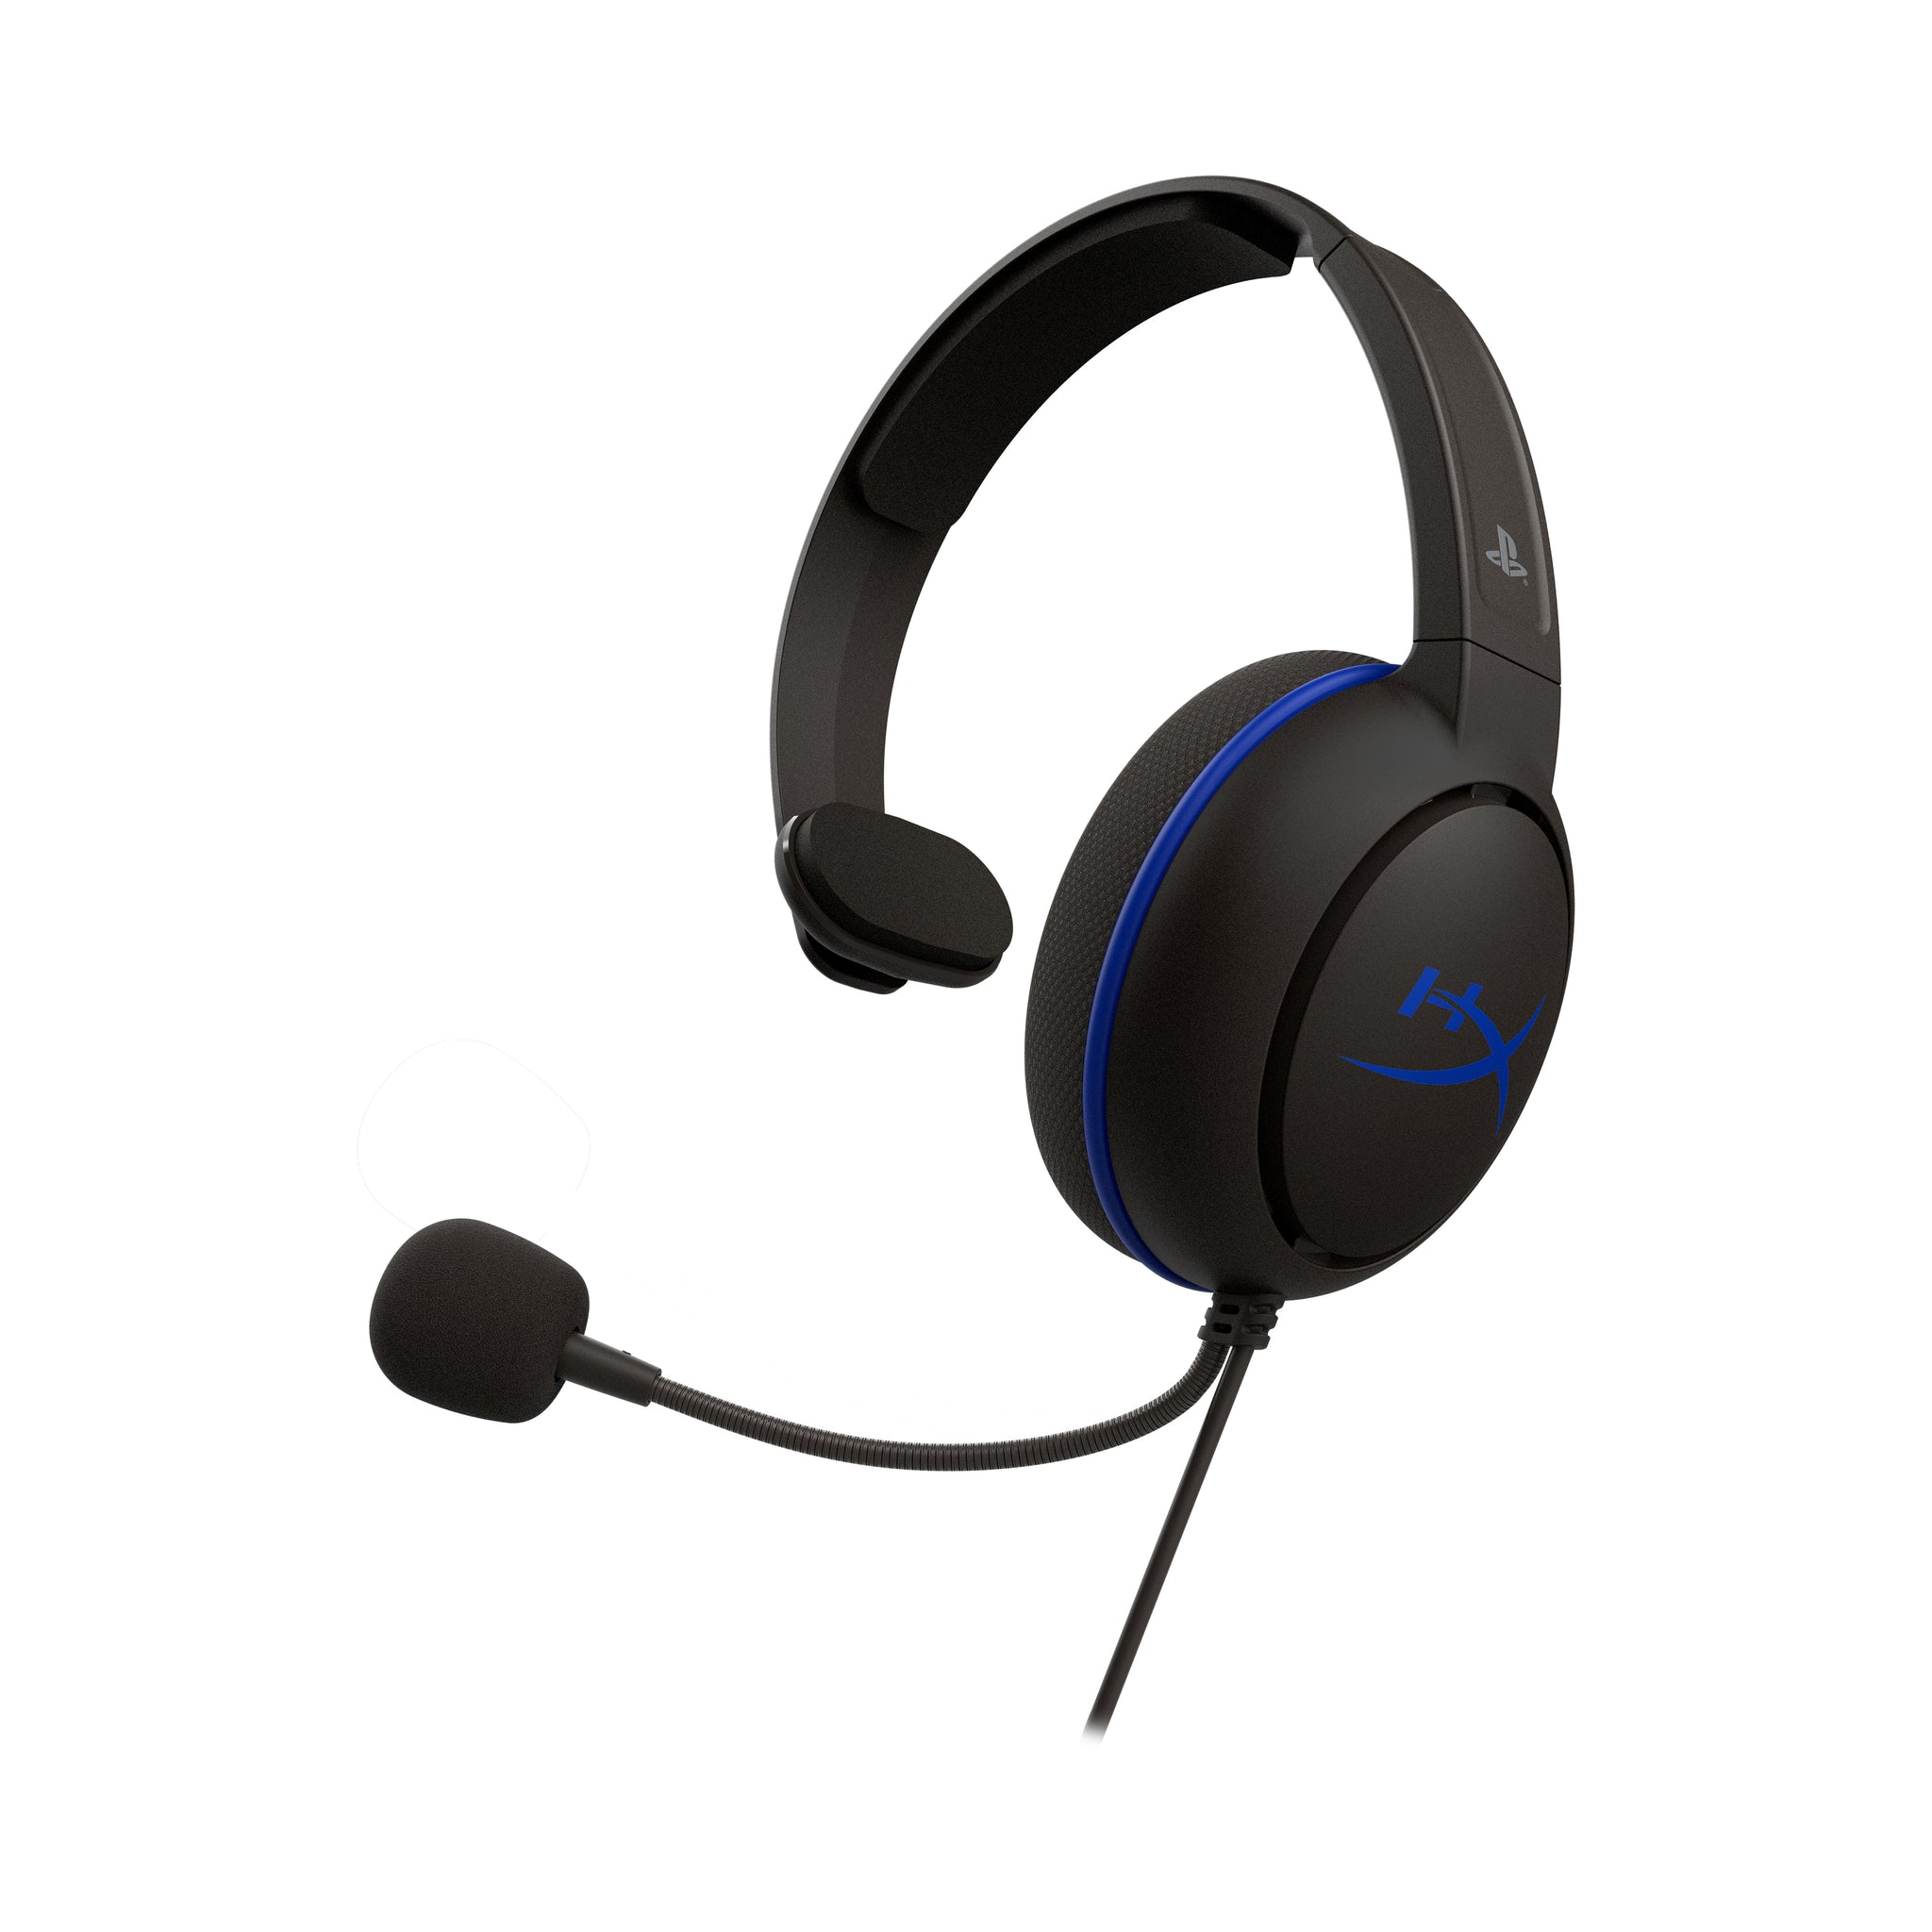 Cloud Chat Headset for PS4 One Ear Cup, Reversible Design | HyperX